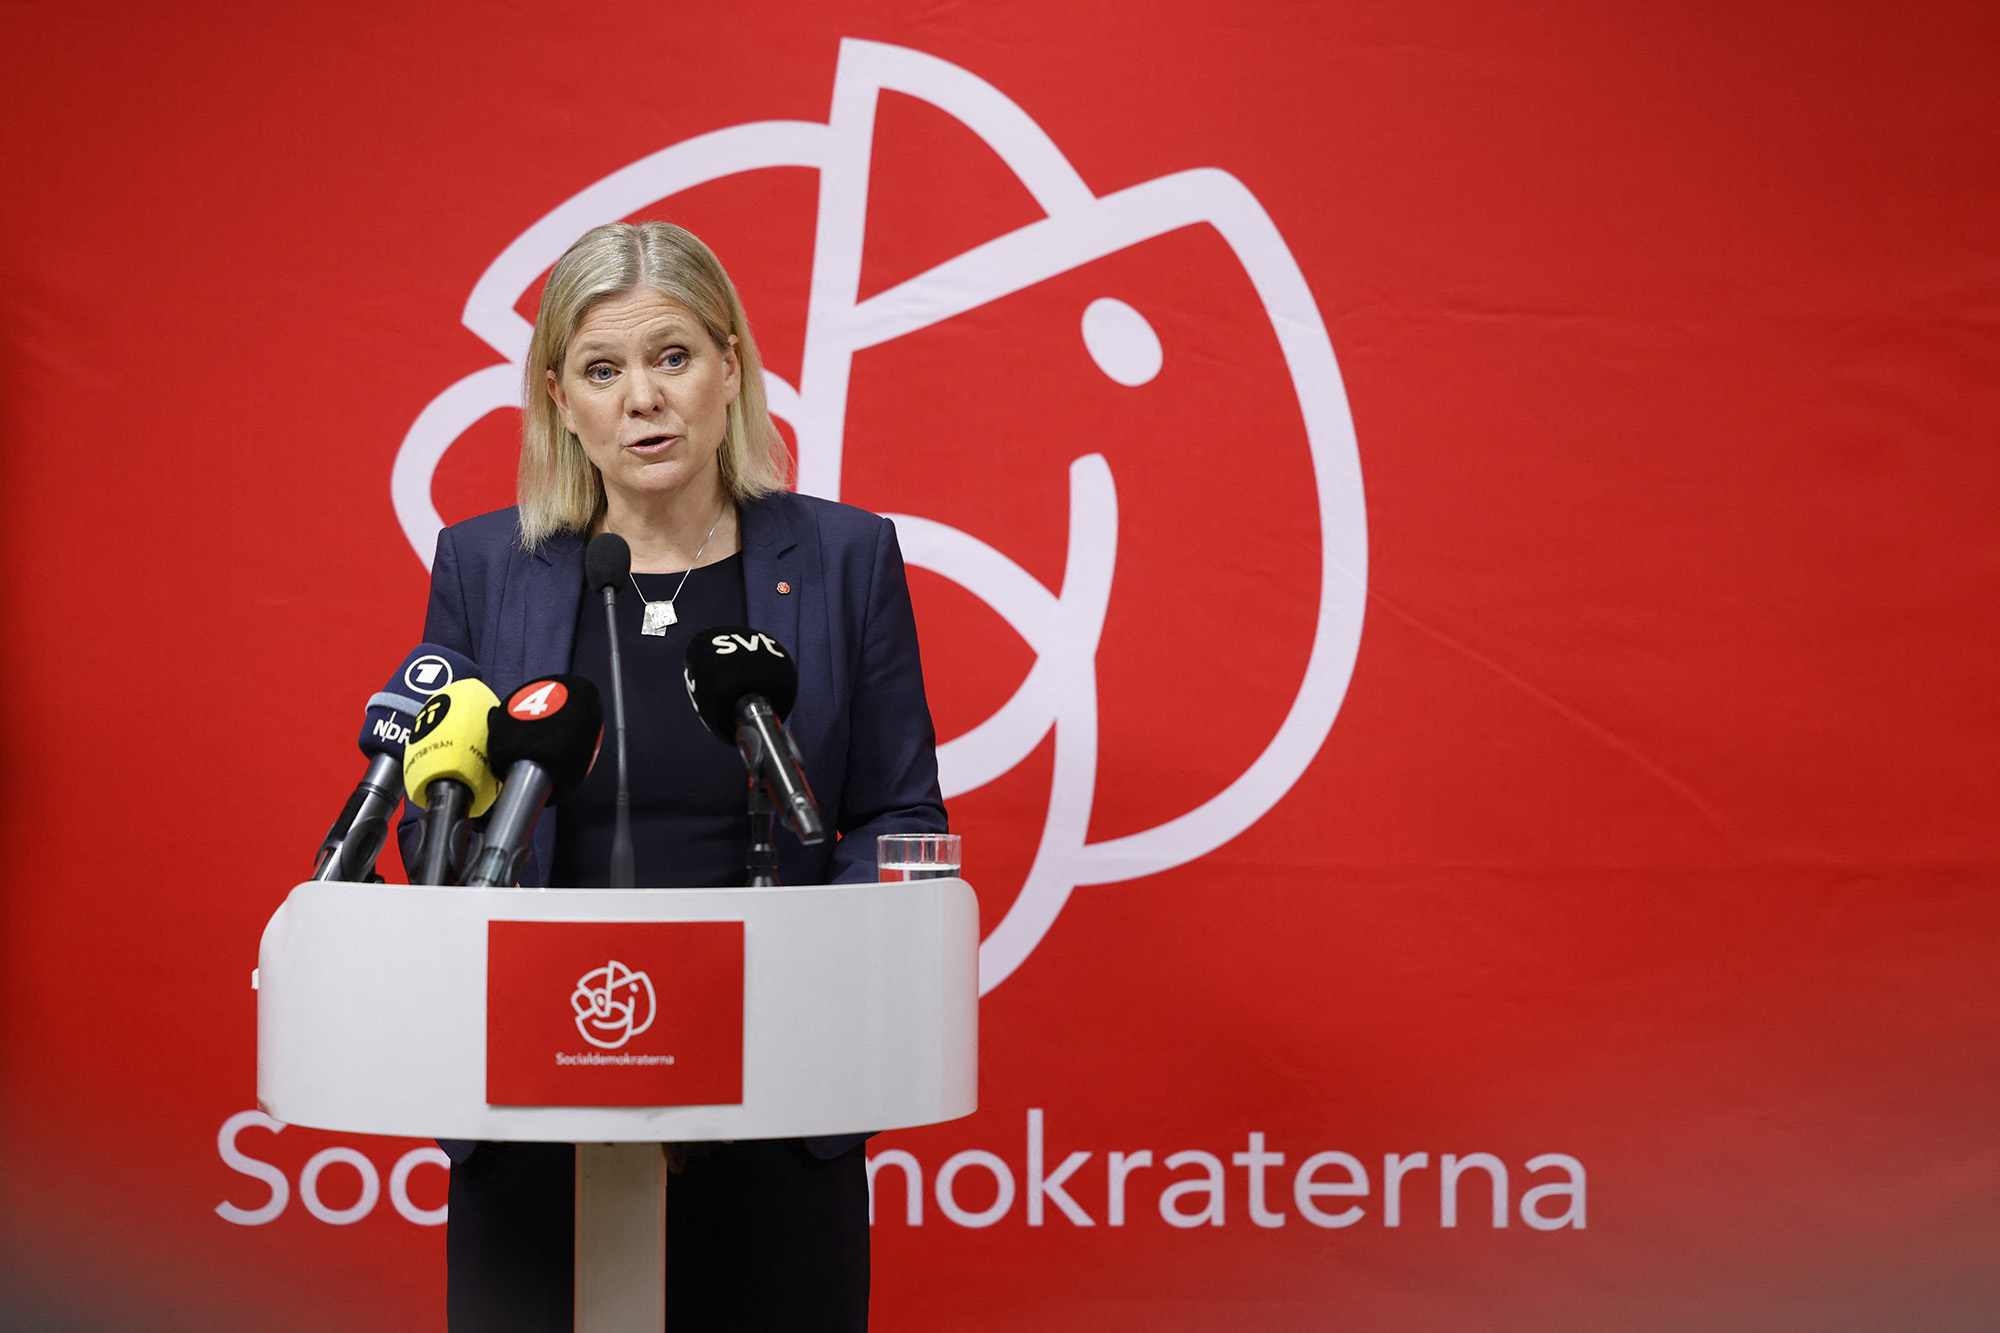 Sweden's Prime Minister Magdalena Andersson gives a press conference after a meeting at the ruling Social Democrat's headquarters in Stockholm, Sweden, on May 15.